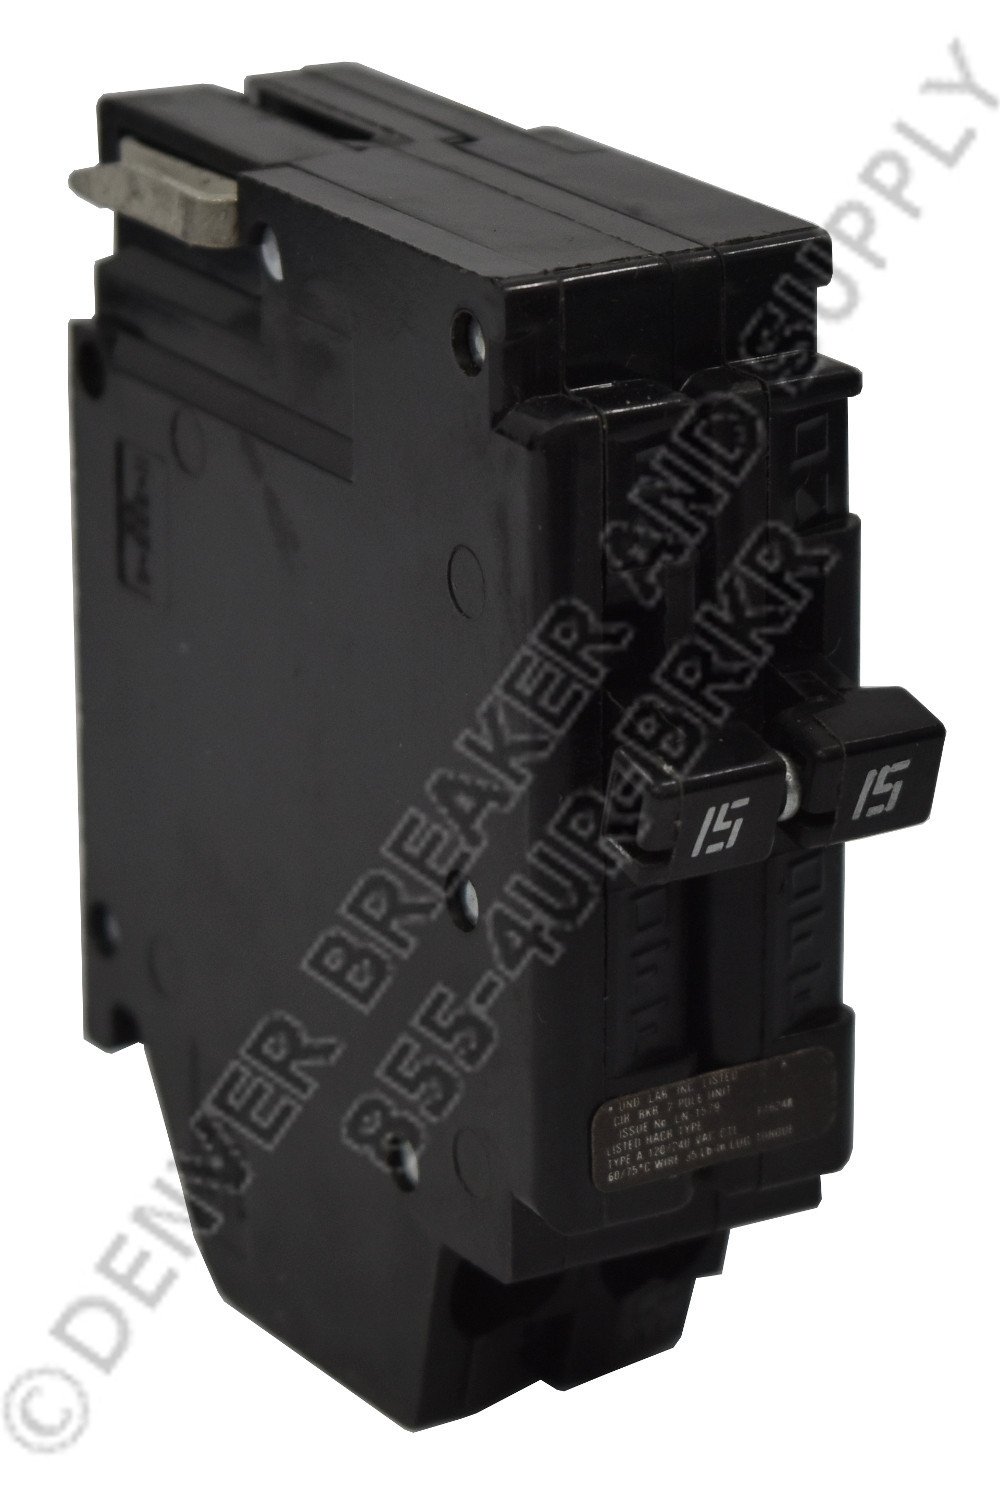 Crousehinds A230 Circuit Breaker